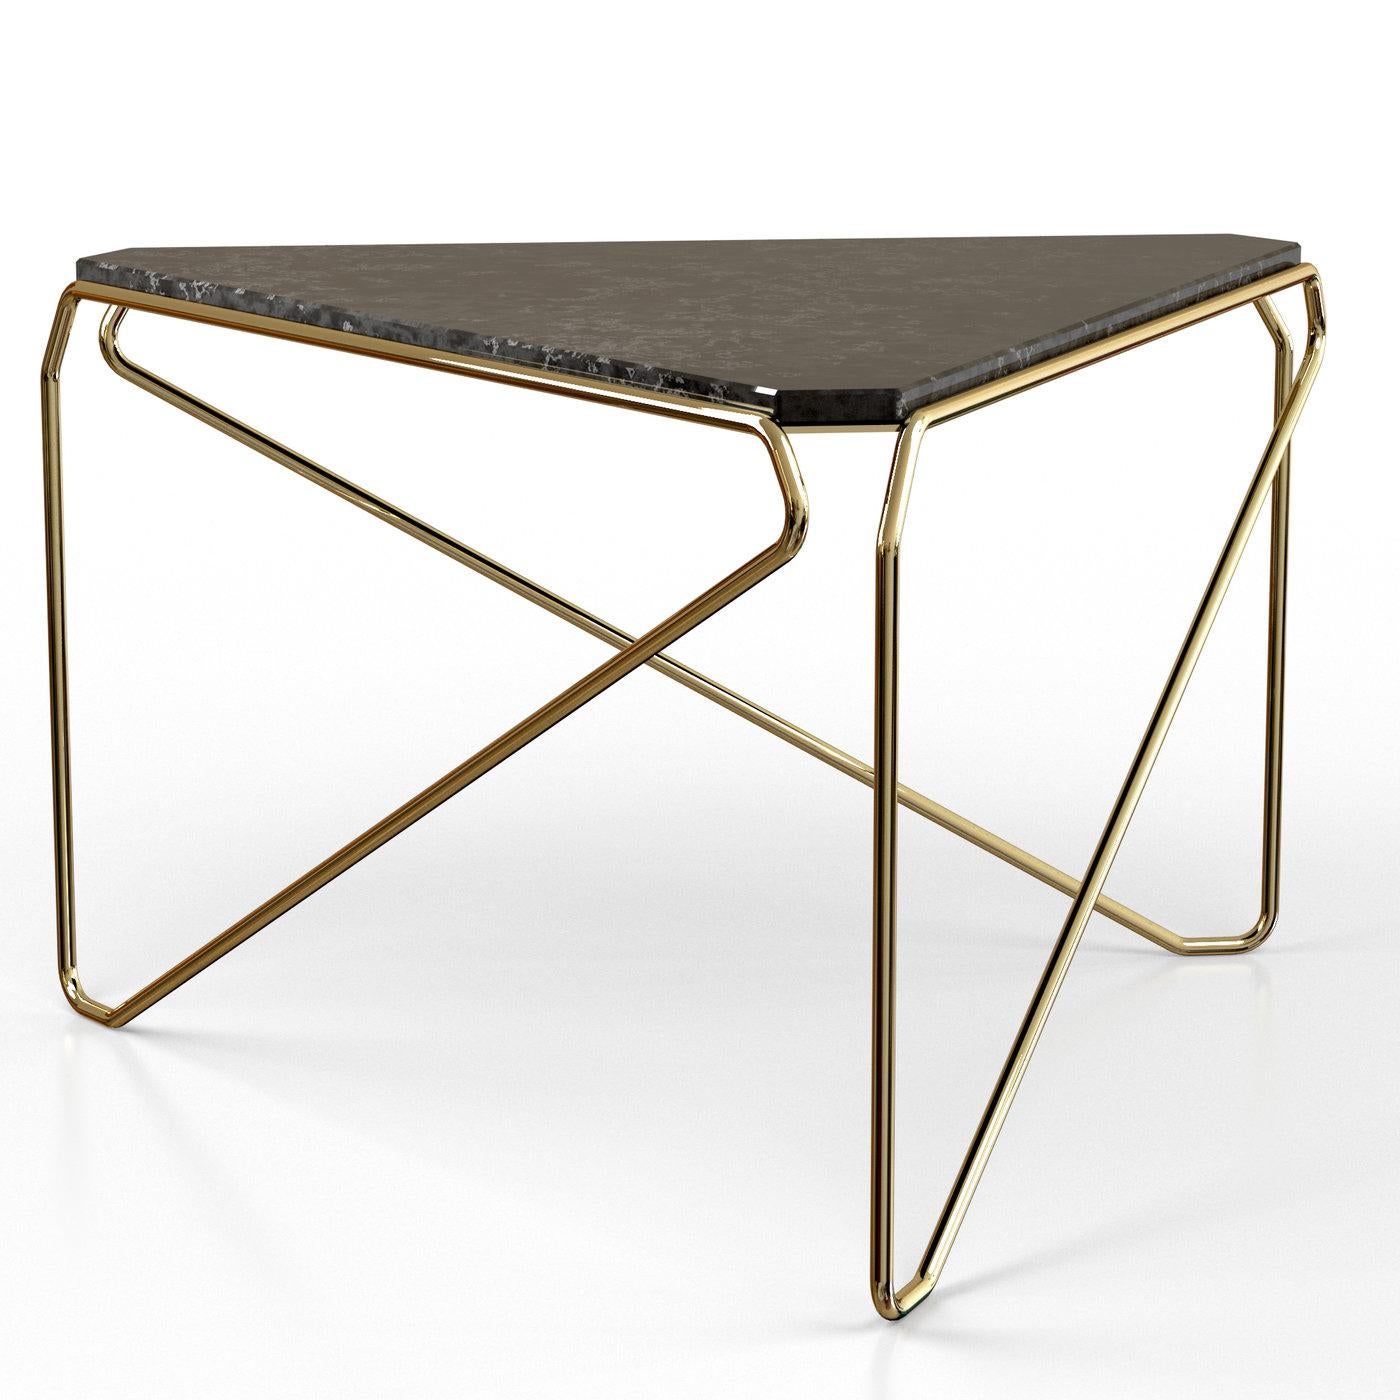 A distinctive design by Giovanni Battista Guerrino Rizzo, this coffee table embodies simple and minimalist elegance. Boasting a triangular profile repeated in the black clouded stoneware top and brass-plated drawn steel frame, it will make a